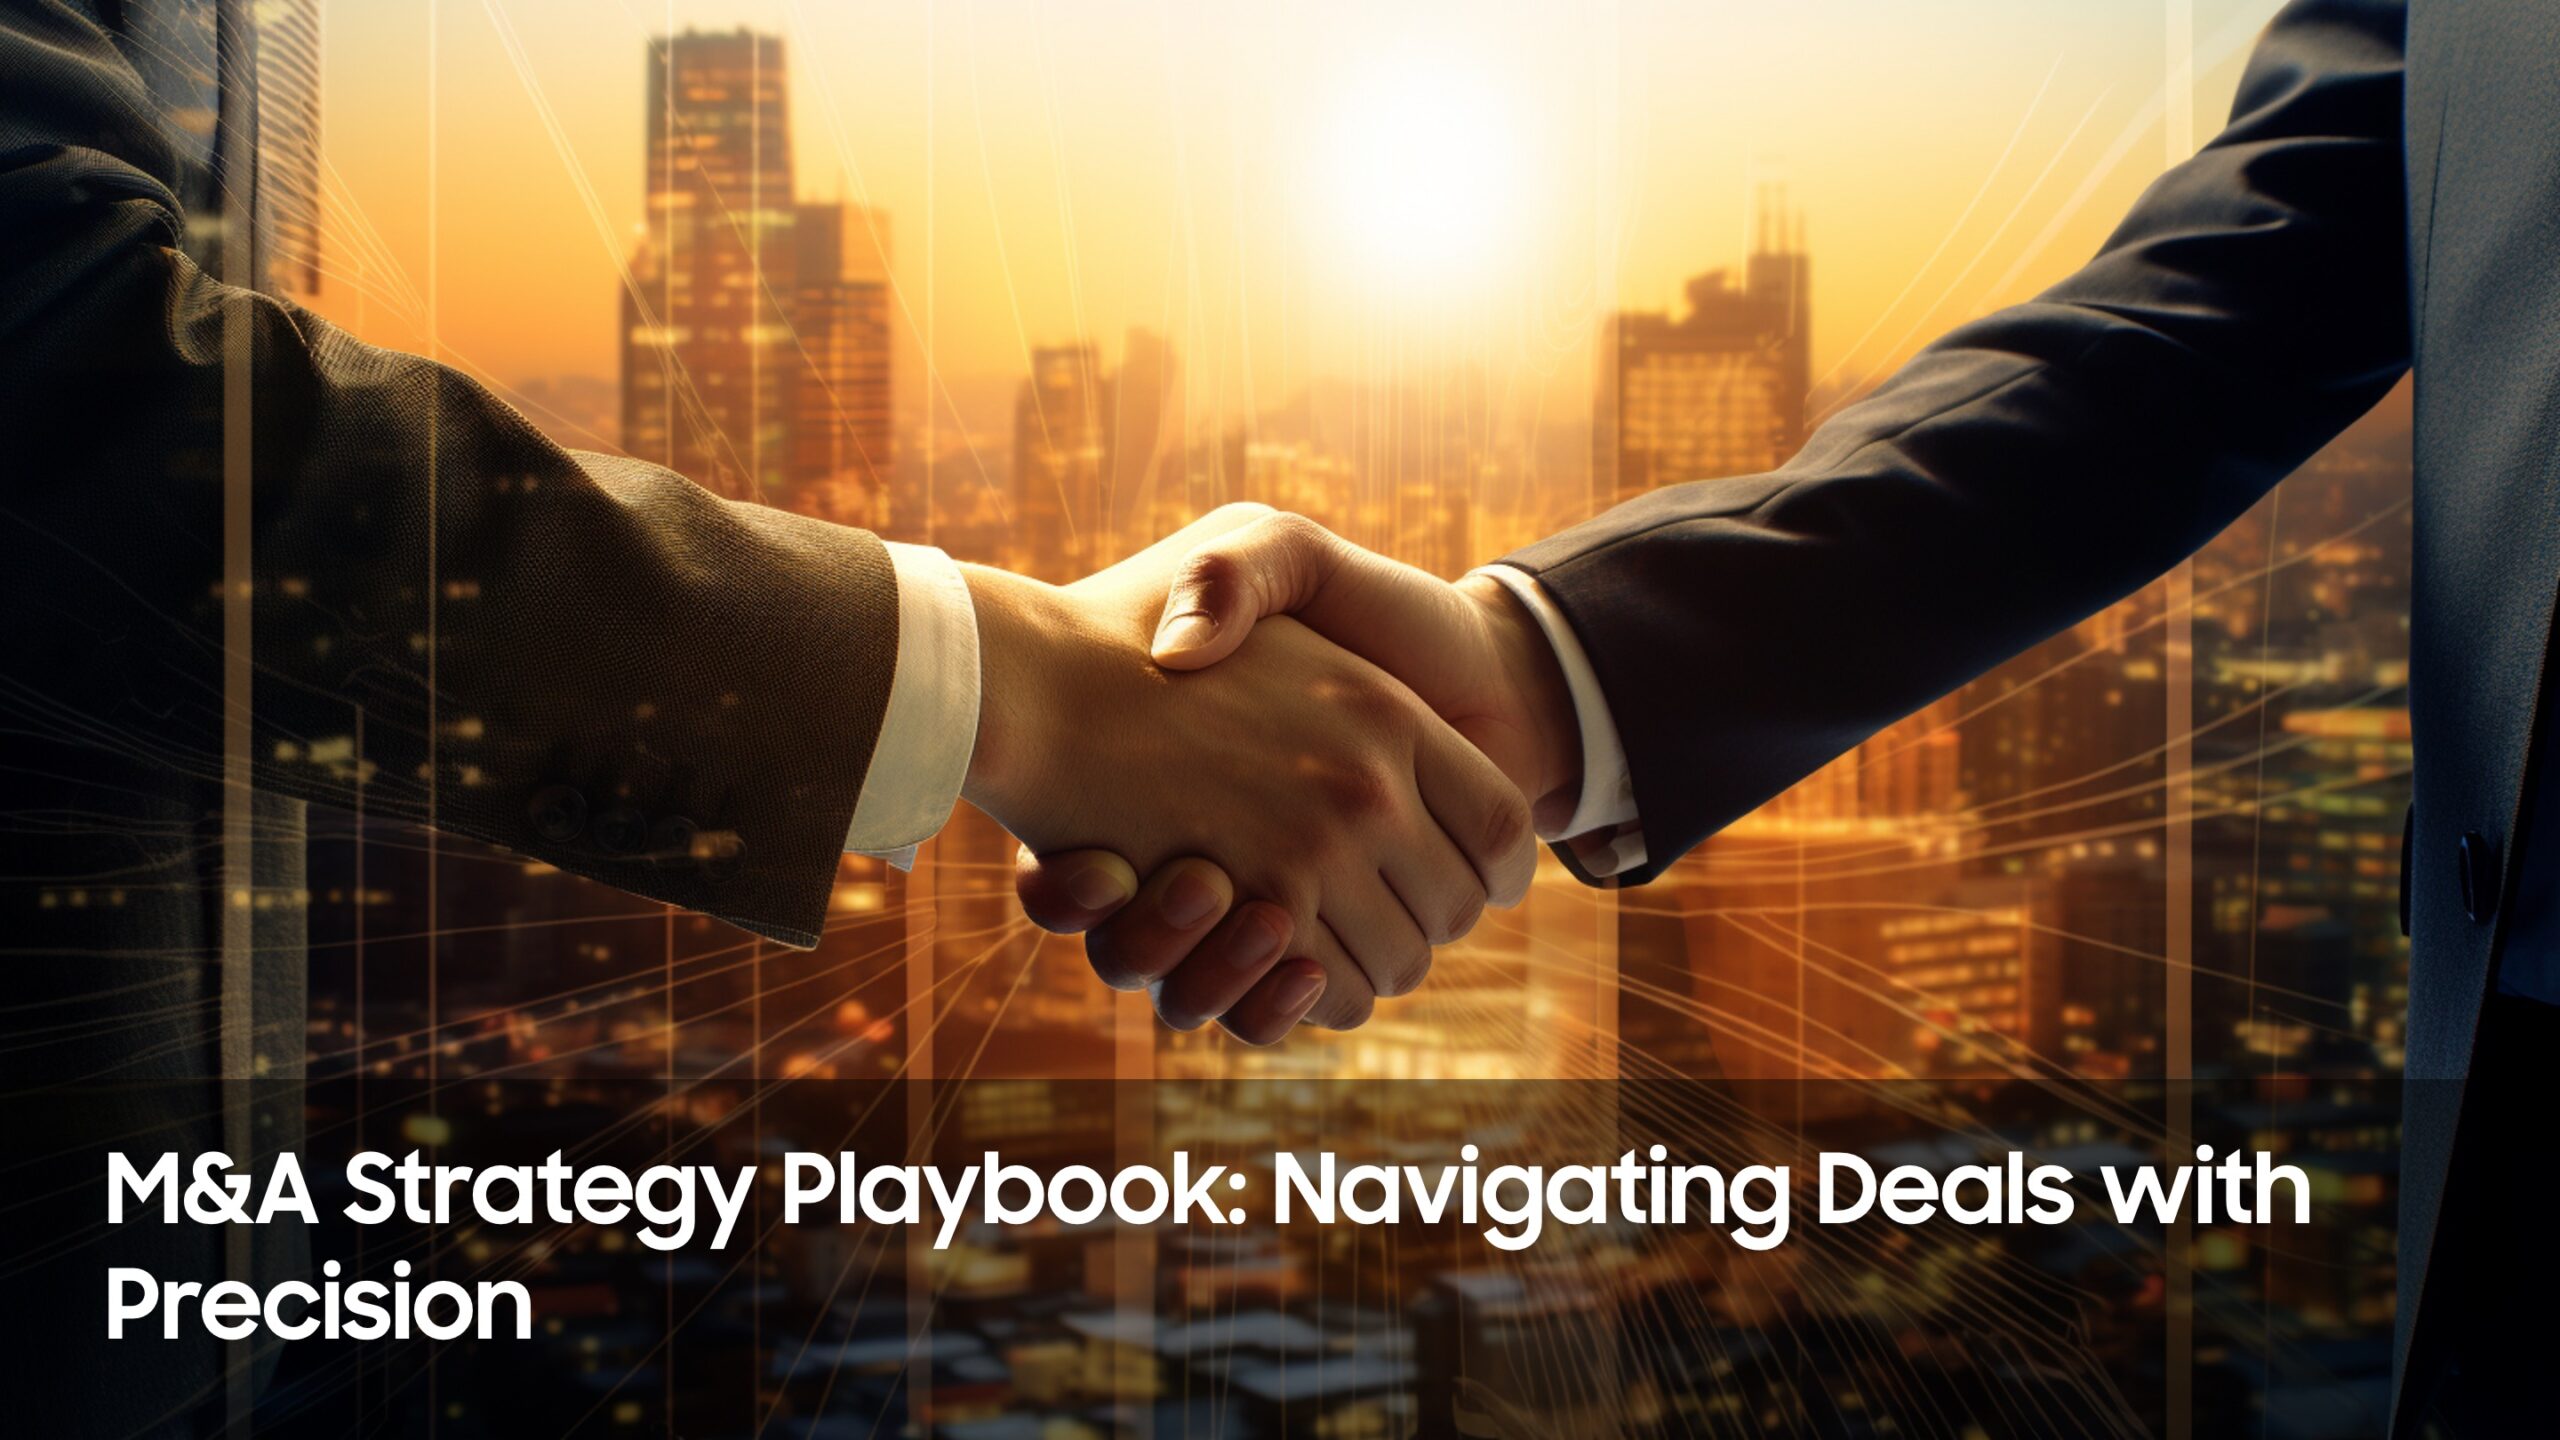 M&A Strategy Playbook: Navigating Deals with Precision